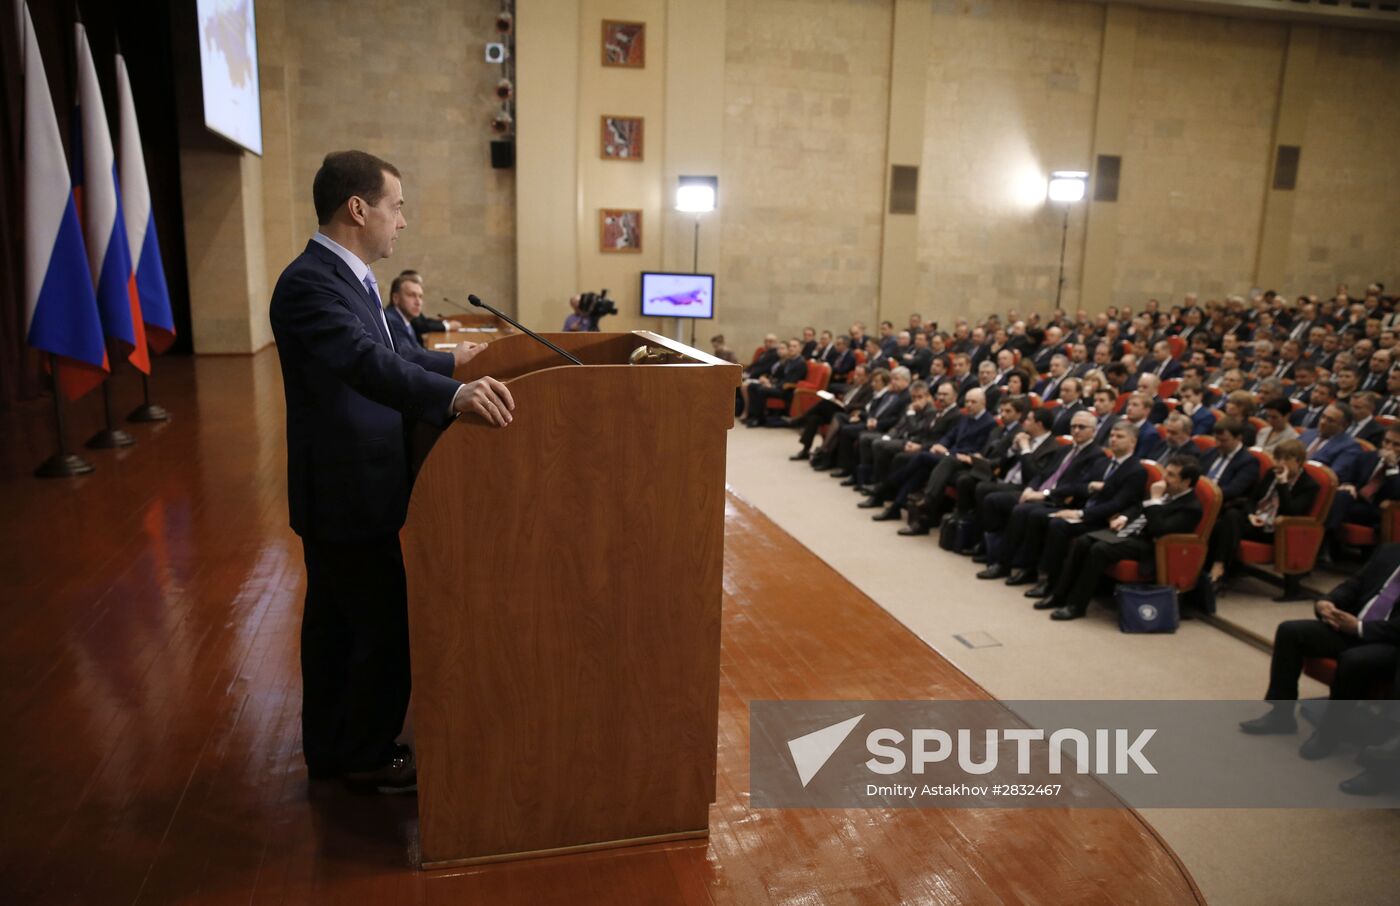 Russian Prime Minister Dmitry Medvedev speaks at an extended meeting of the Economic Development Ministry Board